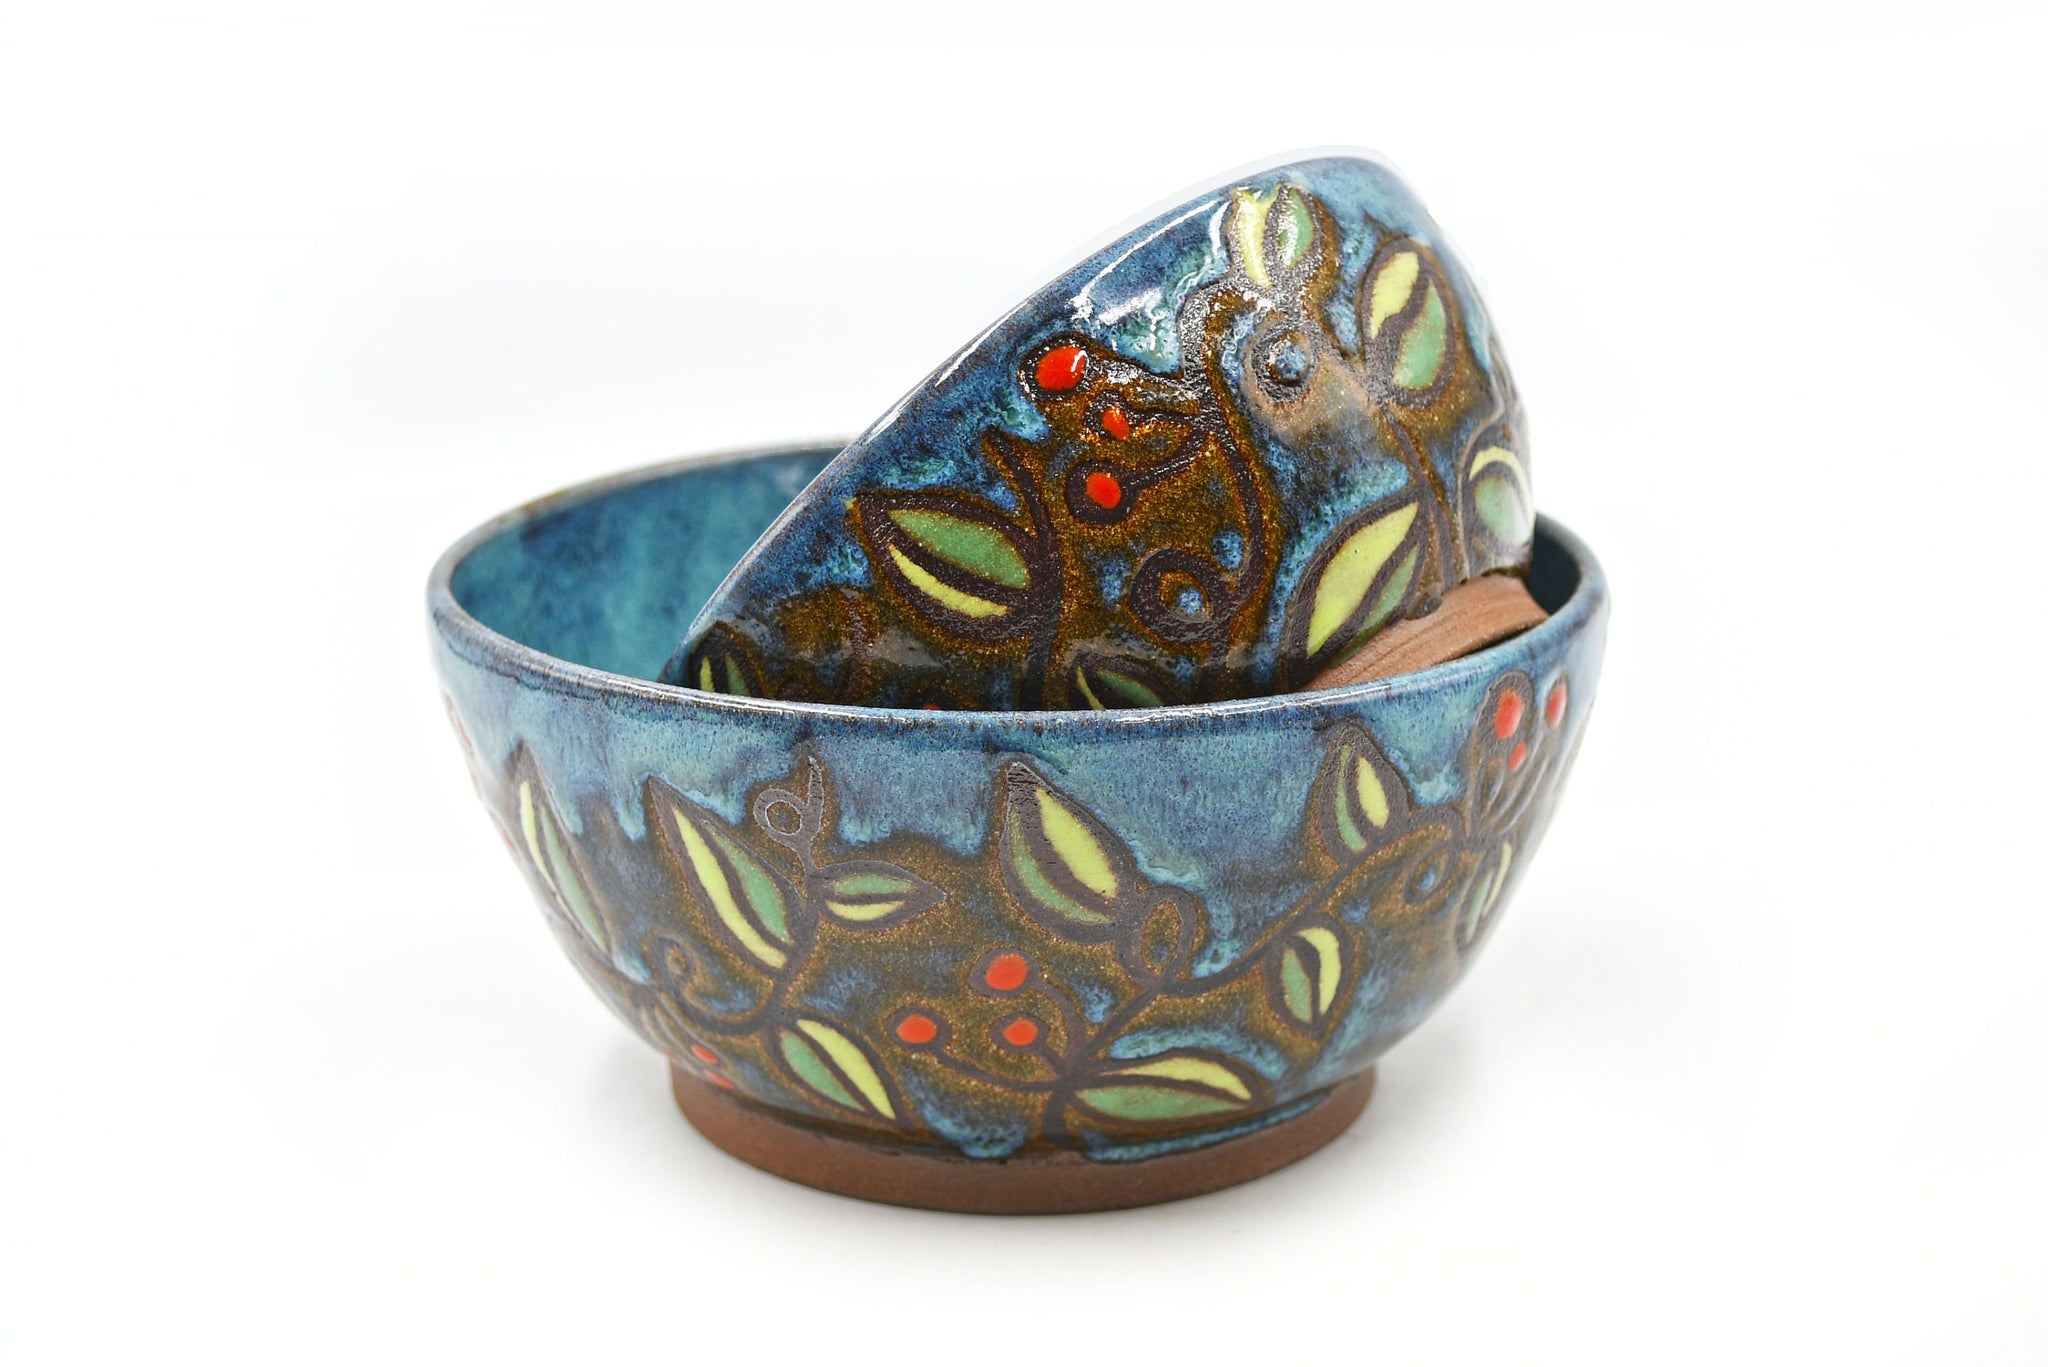 Blue Ceramic Pottery Bowl, Hand Painted Handmade Stoneware, Nested Serving Dish Cuerda Seca Floral Vine, Red Green Brown, Soup, Berry, Candy